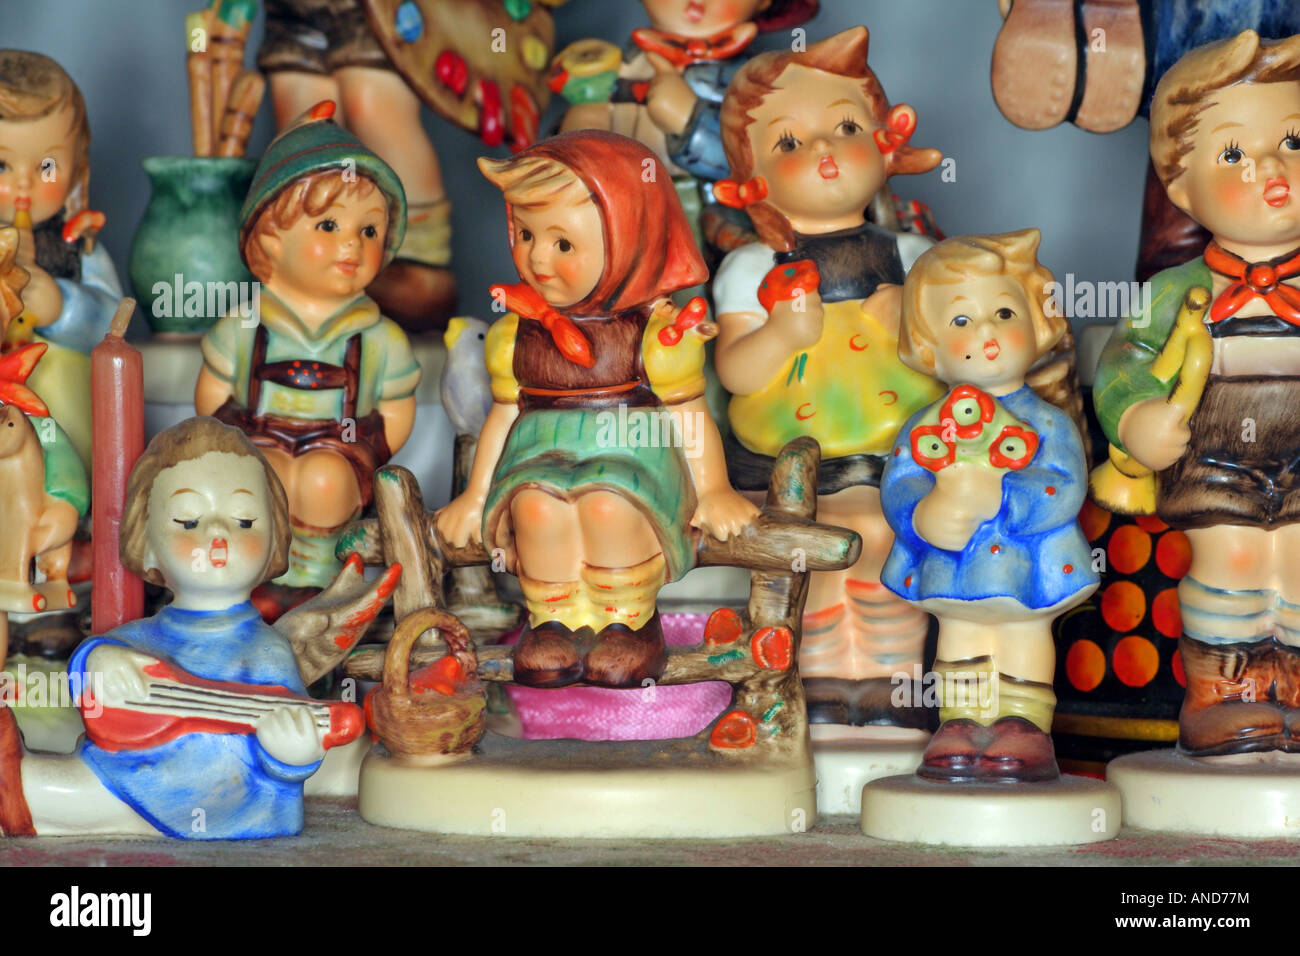 Figurines Resolution Stock Photography and - Alamy